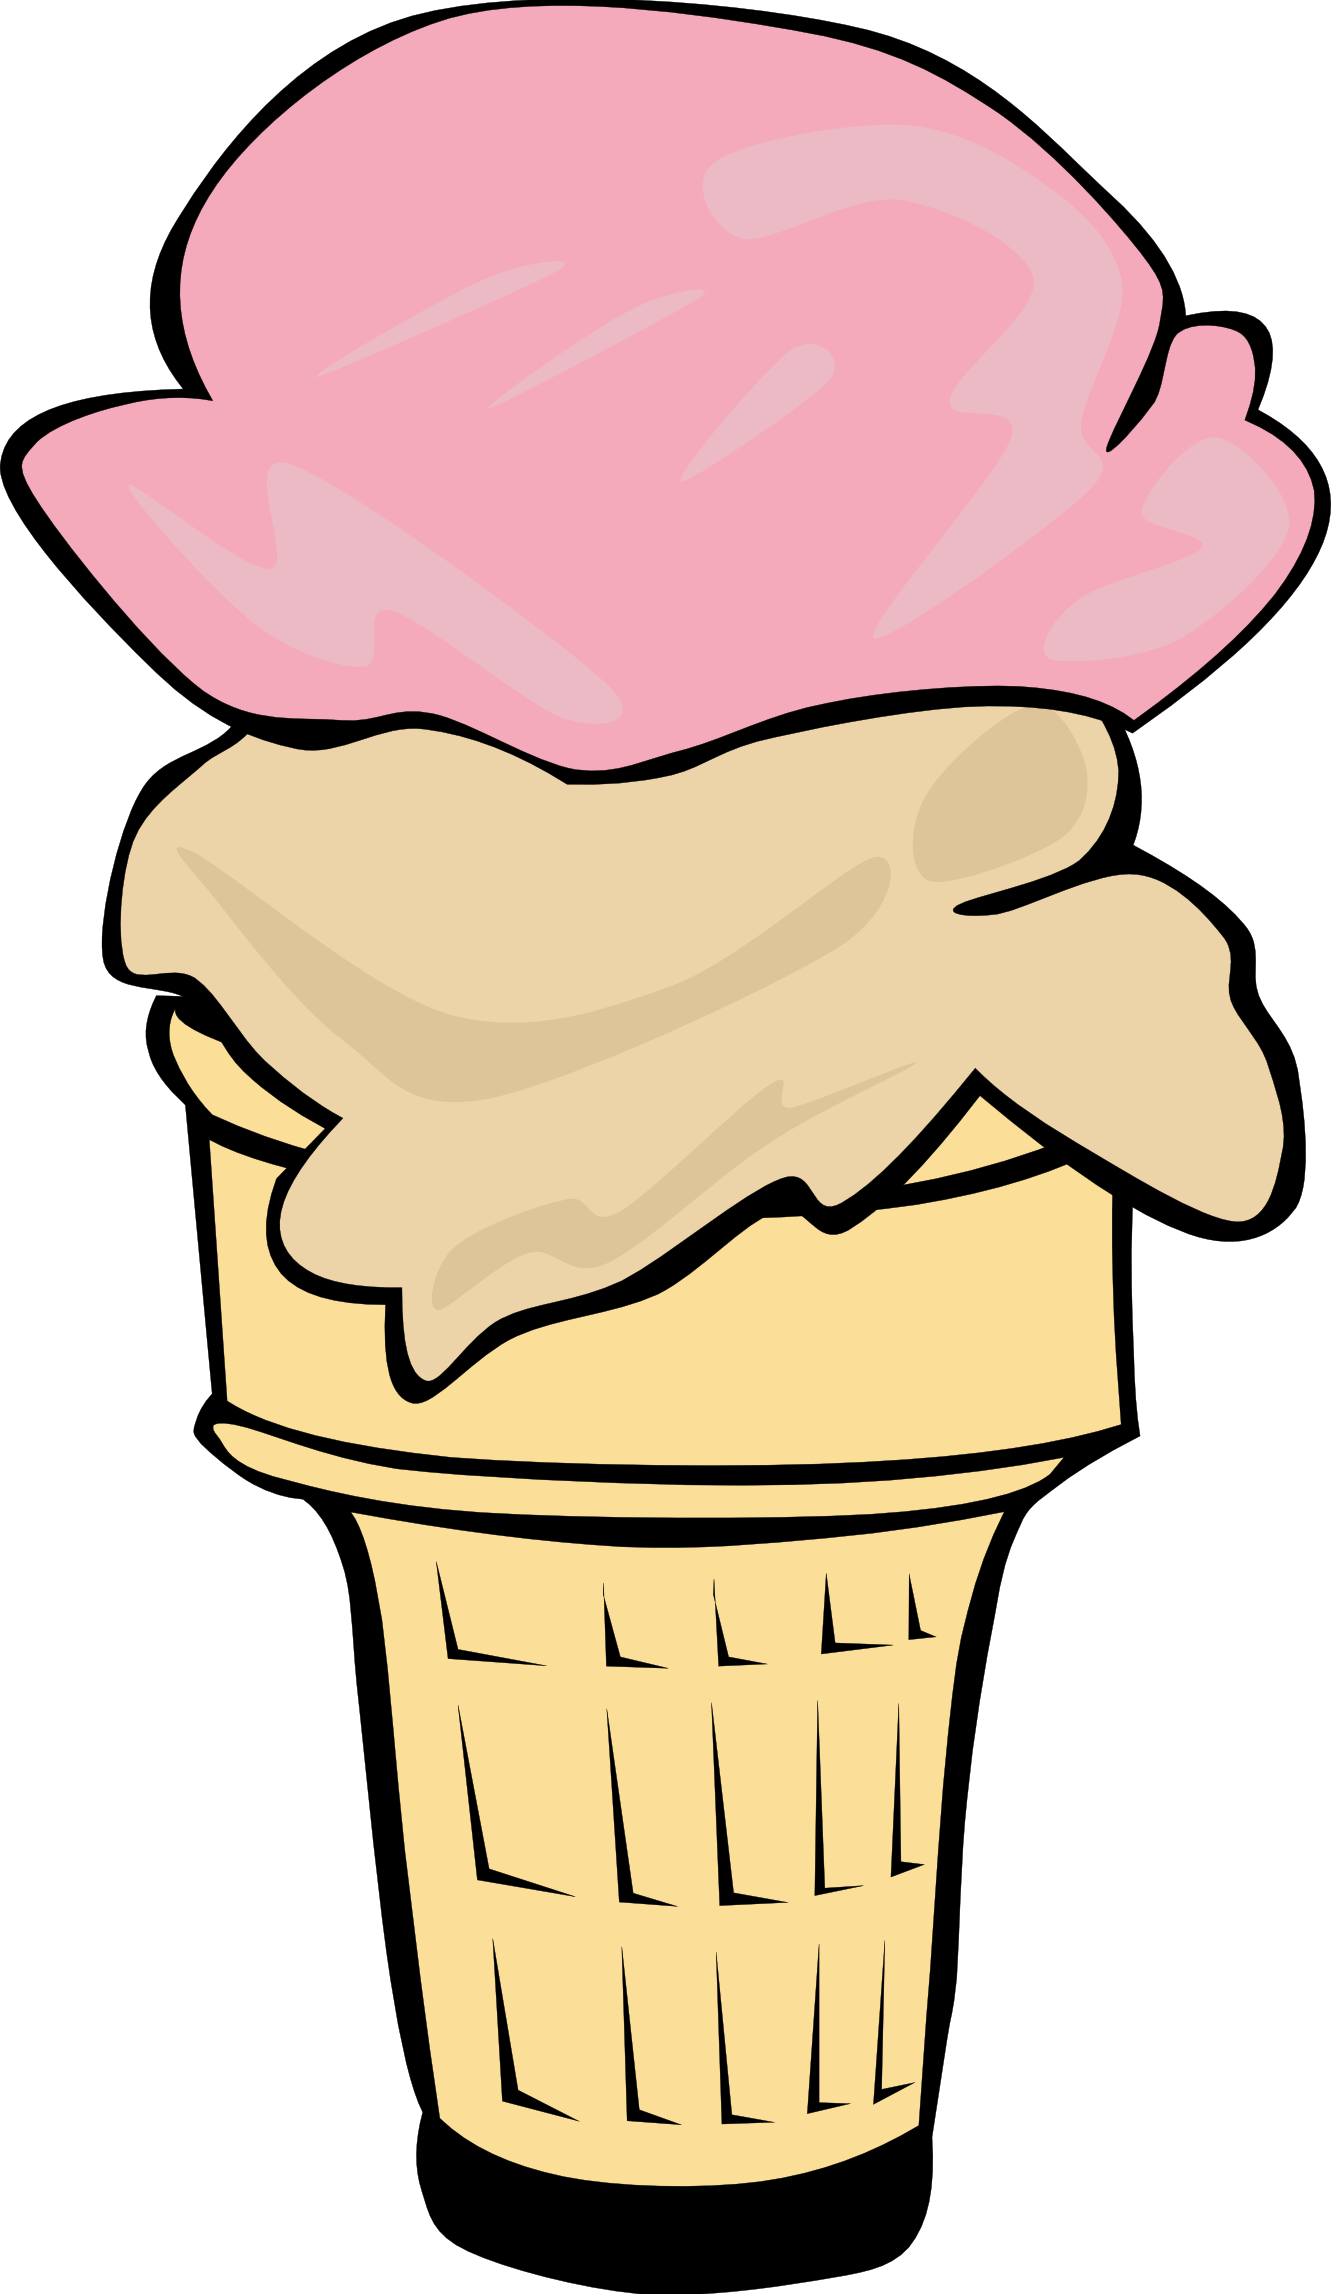 Images For > Ice Cream Social Clip Art